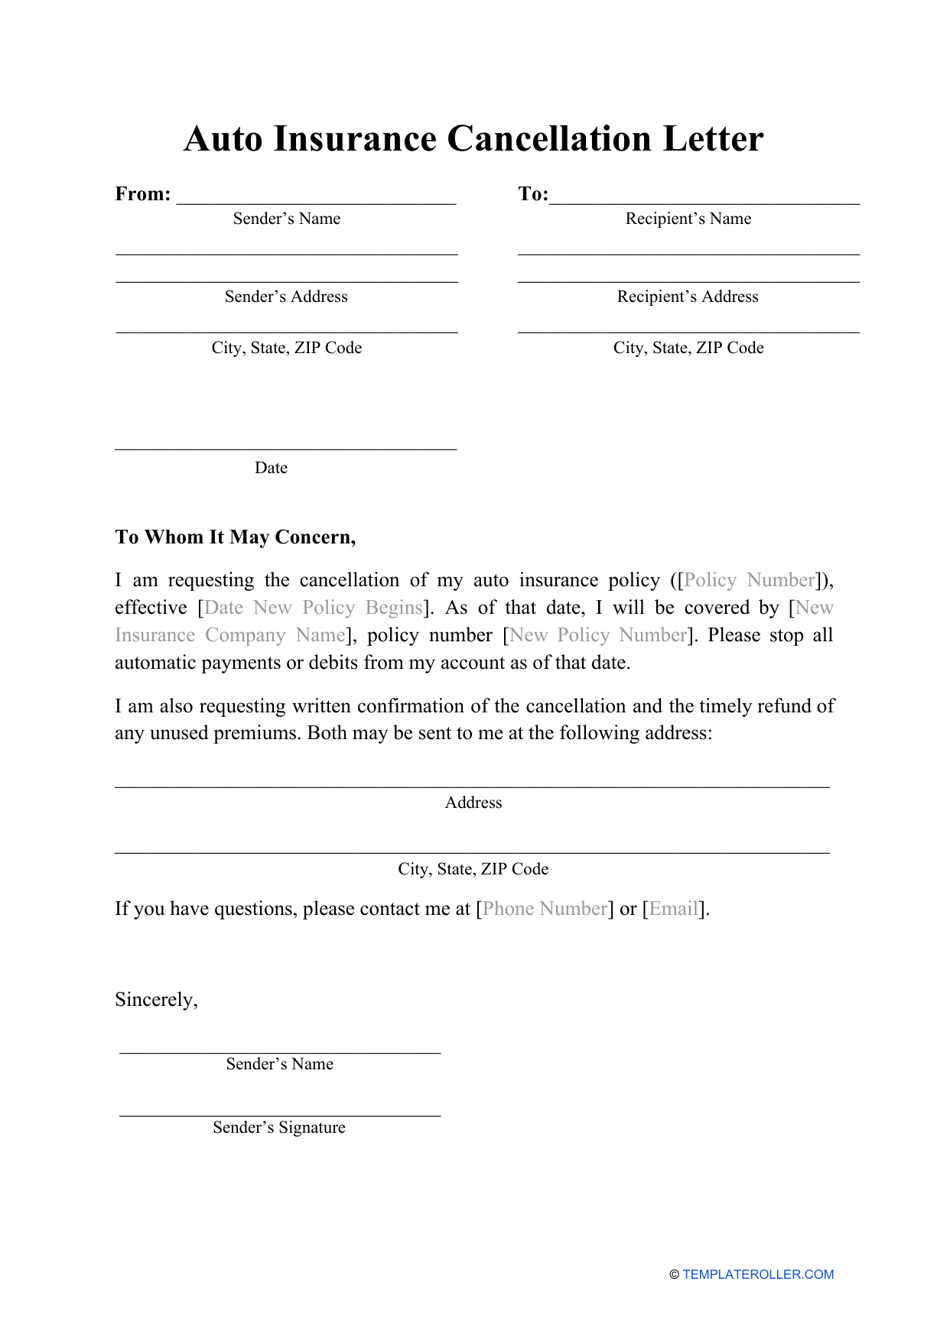 auto-insurance-cancellation-letter-template-download-printable-pdf